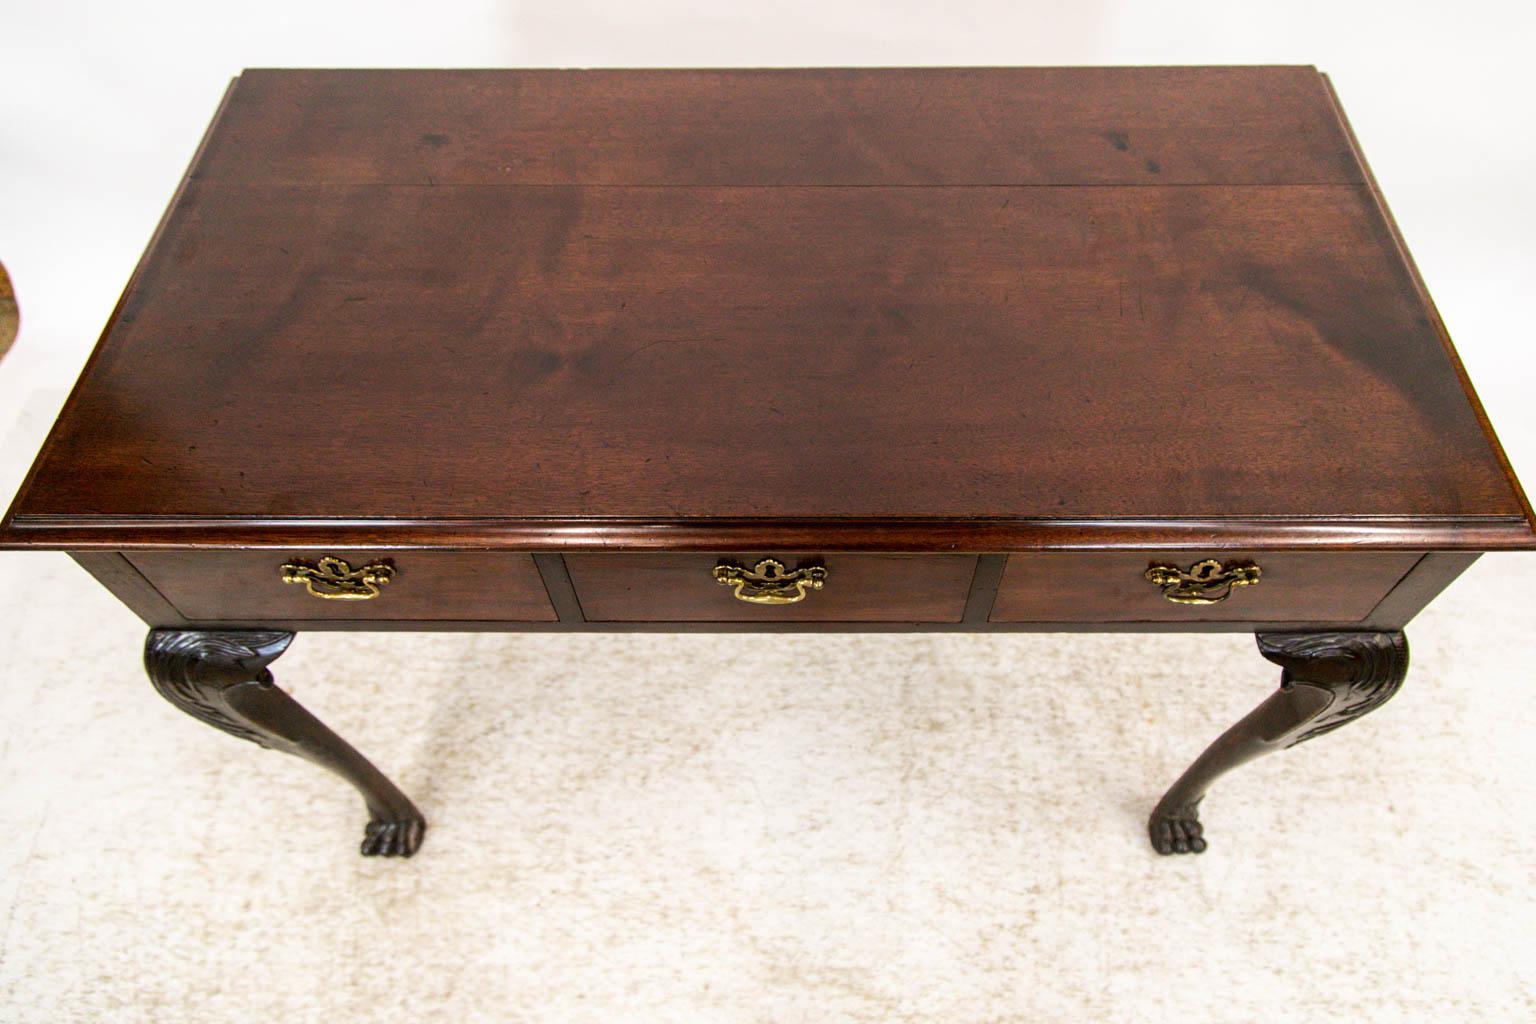 This three drawer Chippendale console table has carved legs with acanthus leaves and volutes and terminate in hairy paw feet.